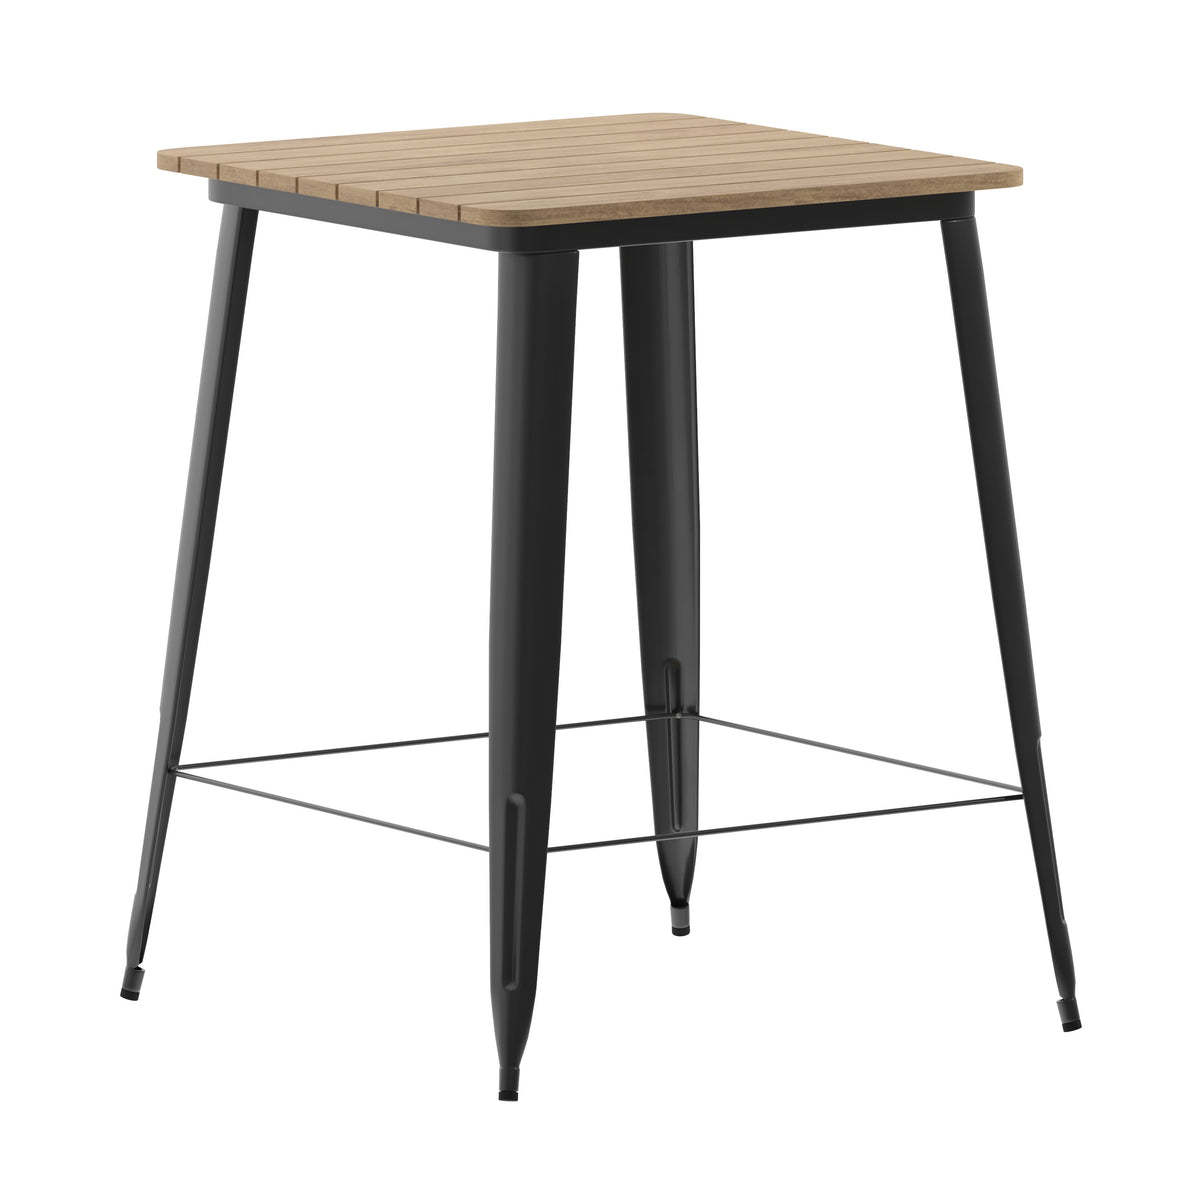 Brown/Black |#| 31.5inch SQ Commercial Poly Bar Top Restaurant Table with Steel Frame-Brown/Black